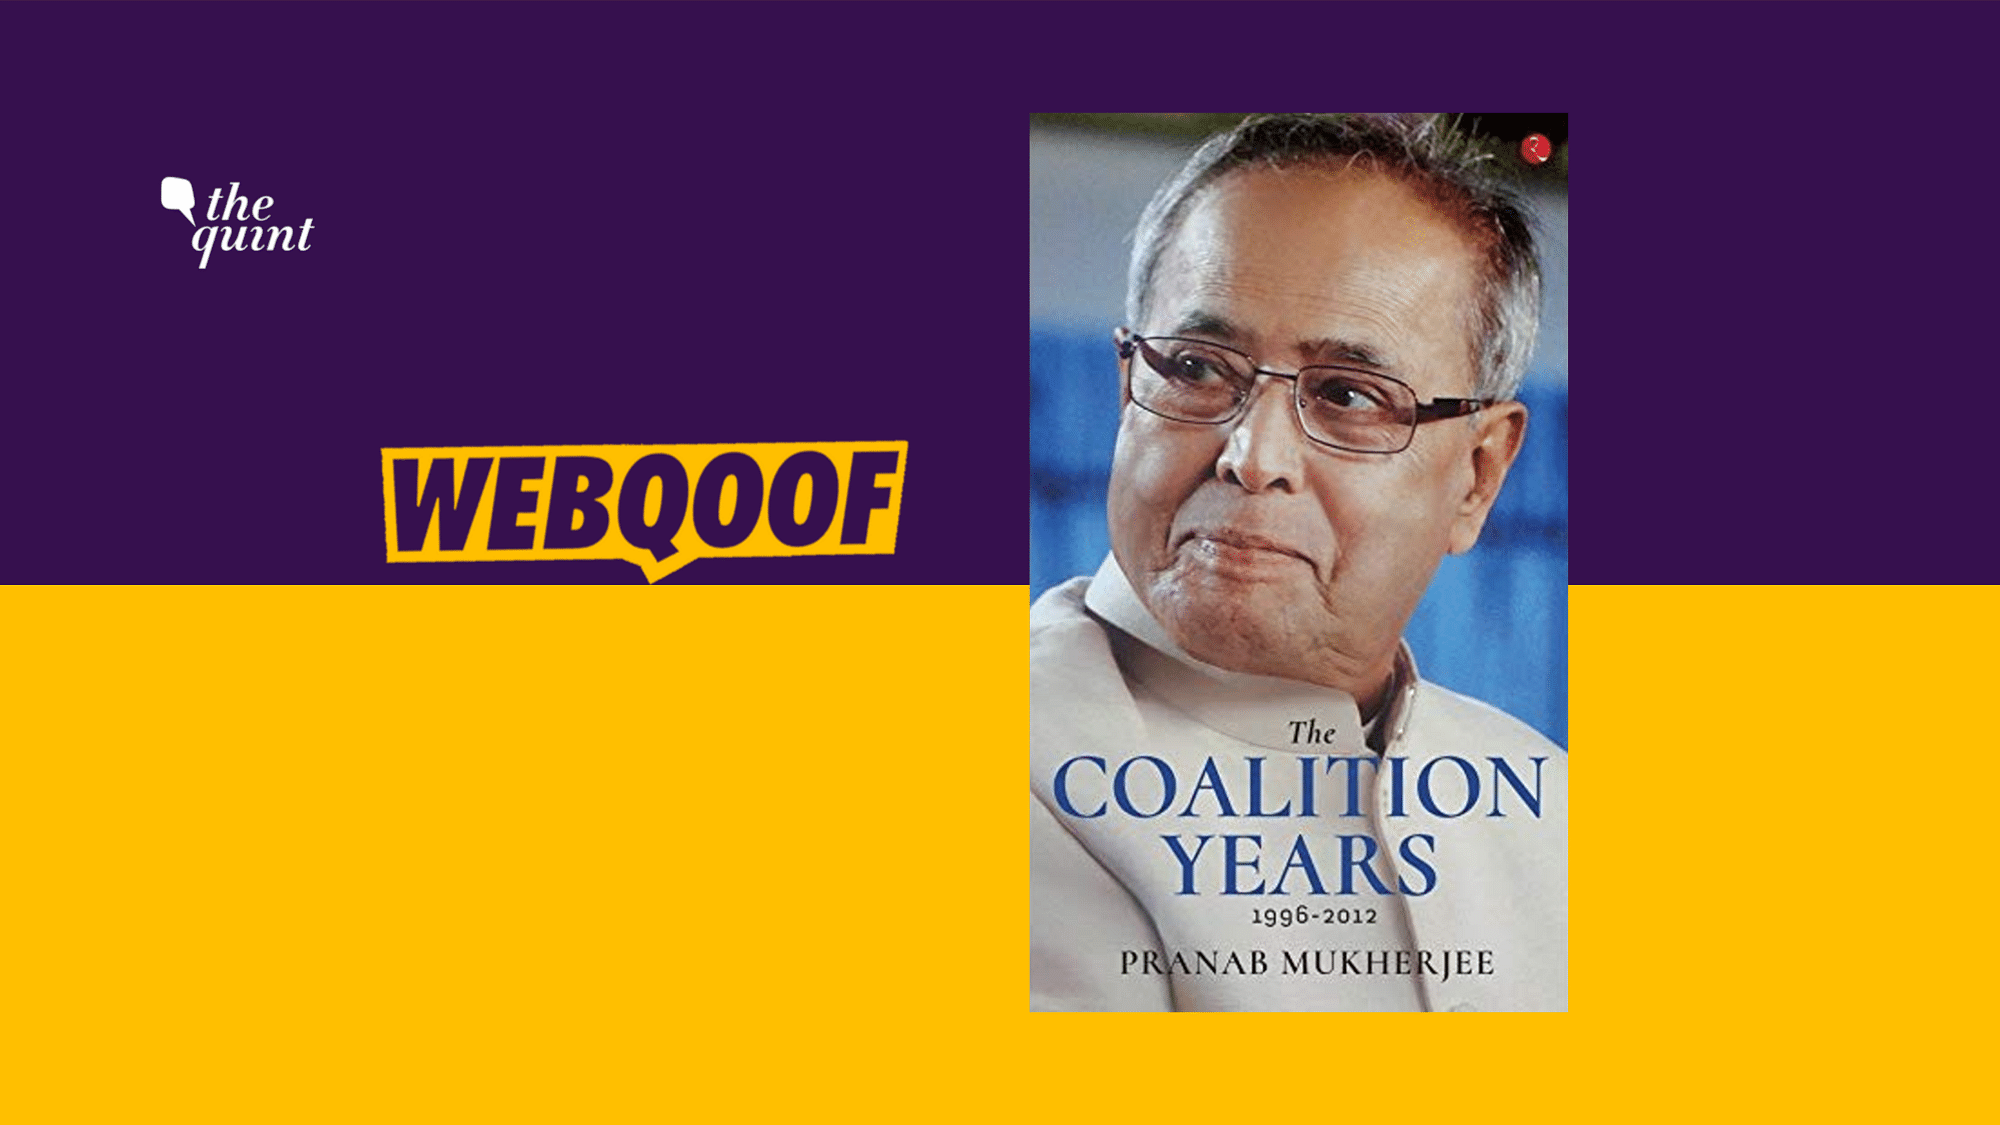 An article falsely claimed that Pranab Mukherjee’s book mentioned that Sonia Gandhi is anti-Hindu.